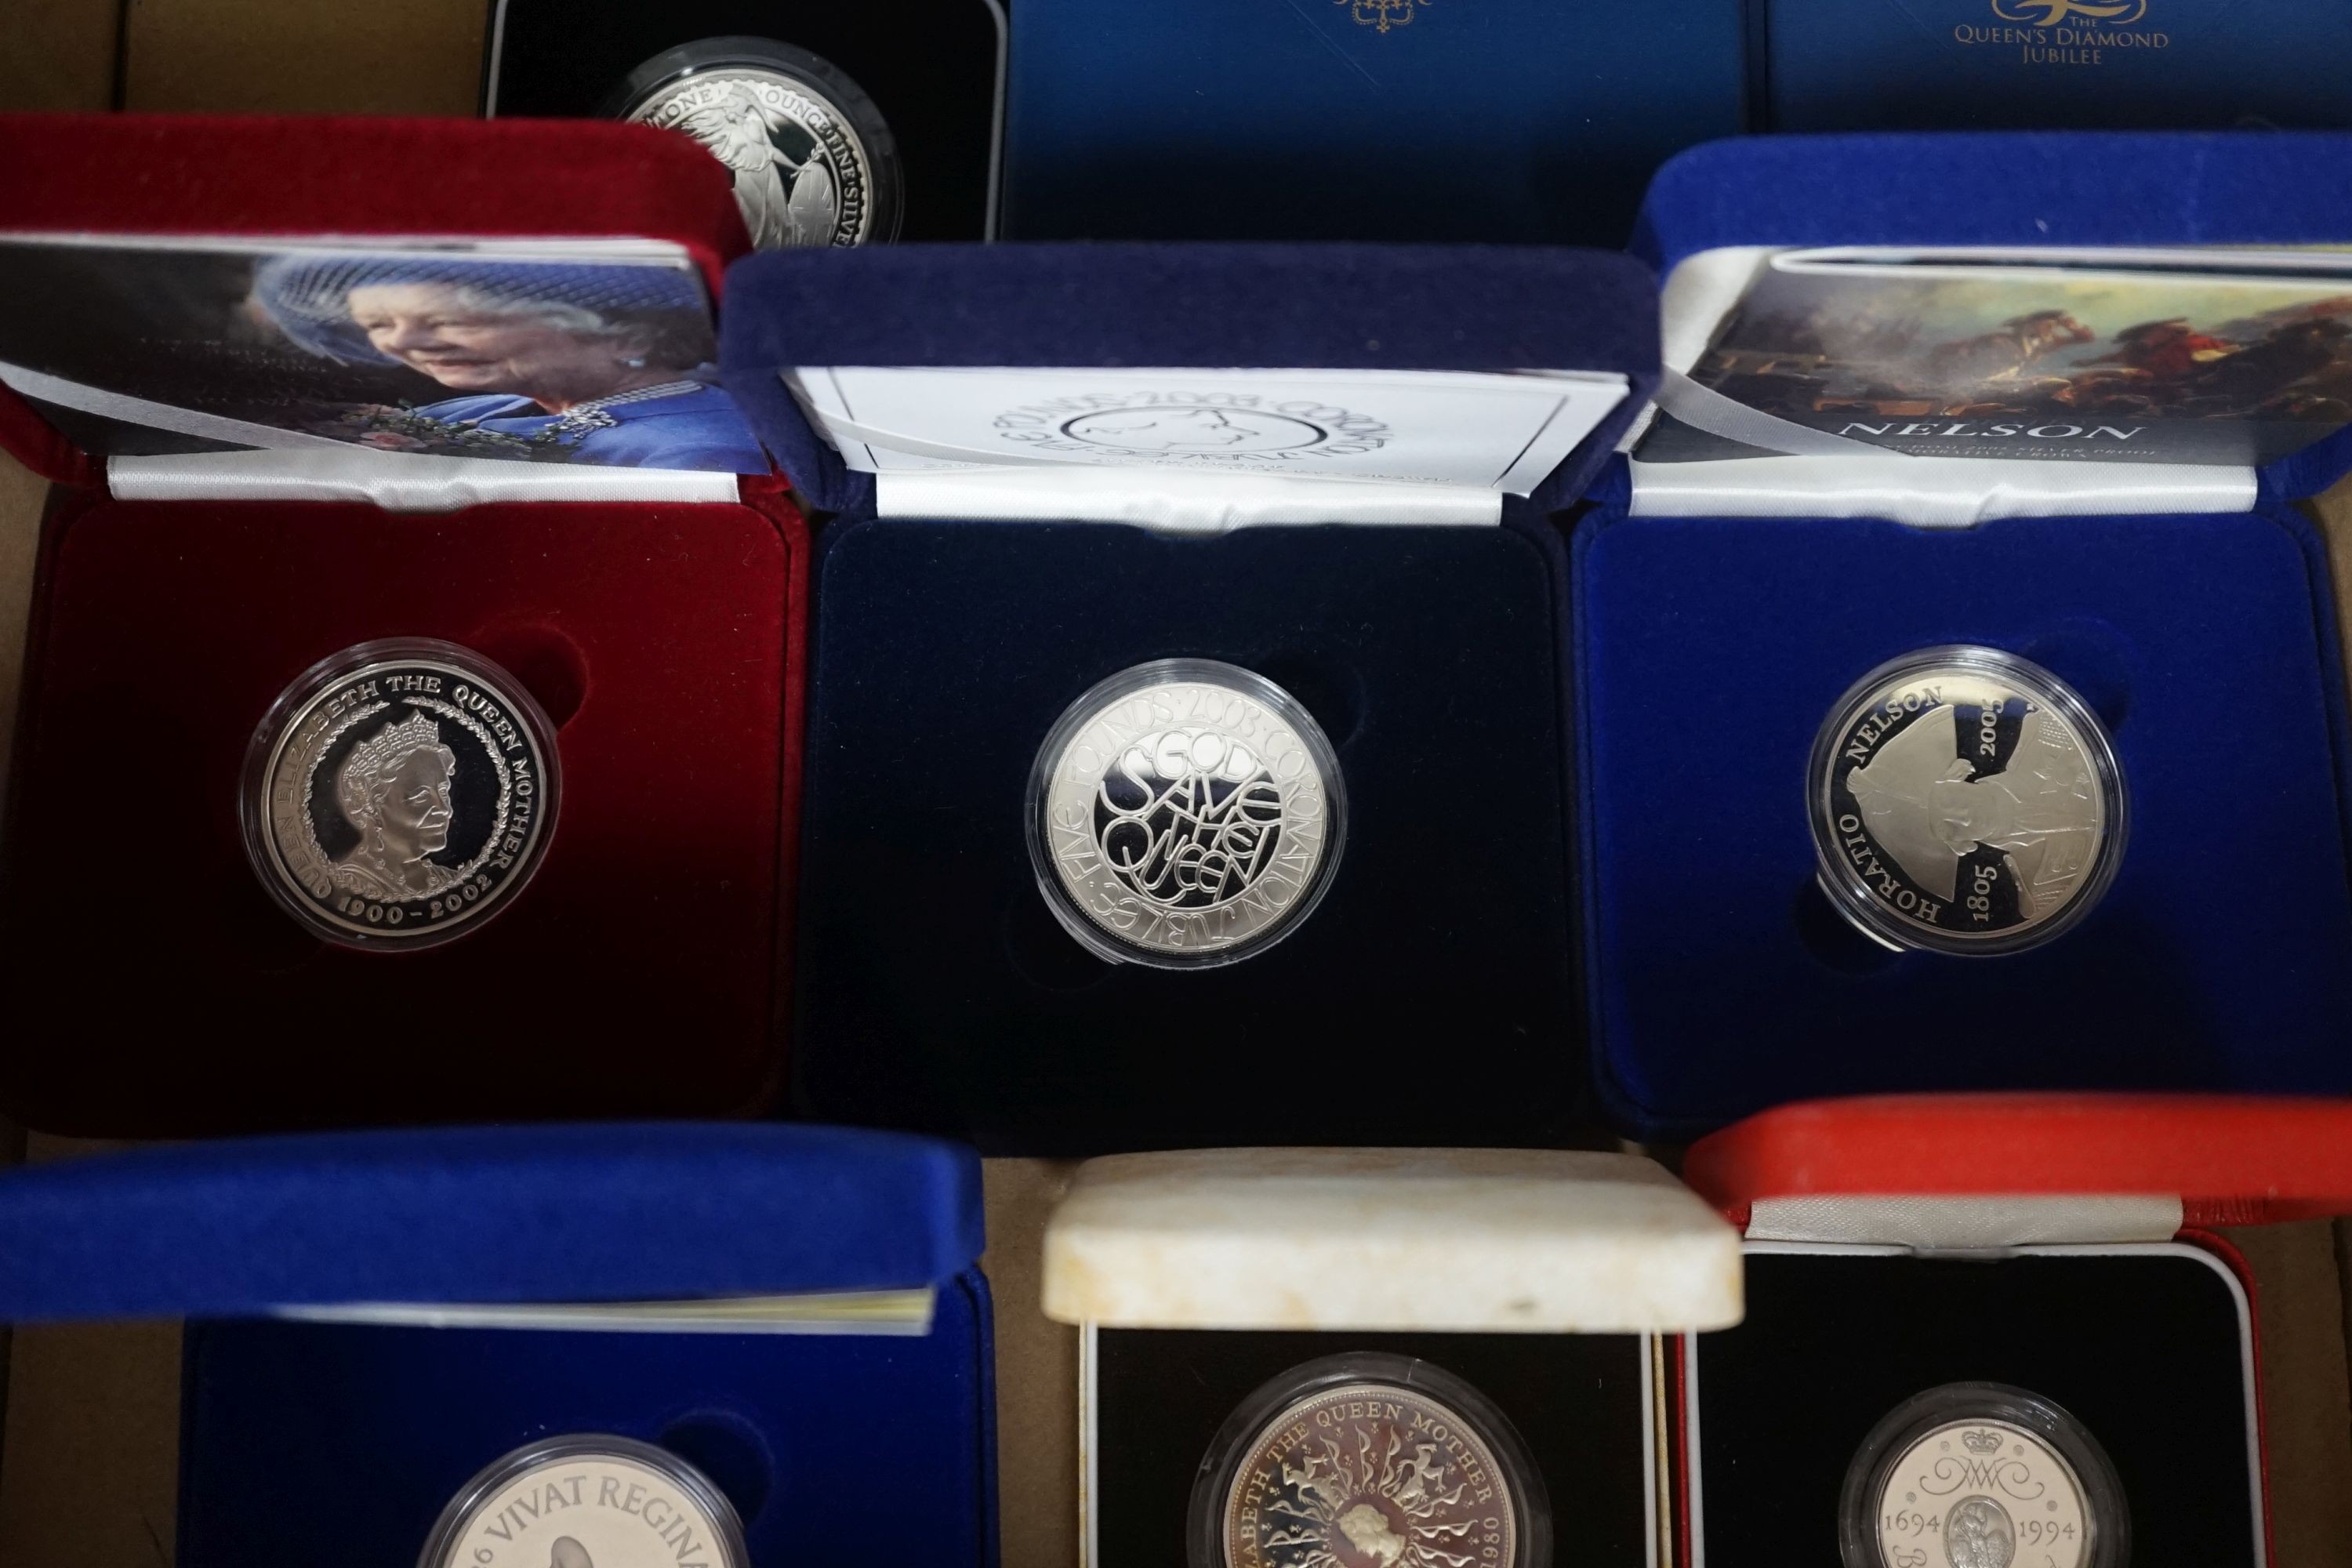 Cased Royal Mint UK silver proof coins – a 2006 1oz. ,Britannia £2, a 2012 QEII Diamond Jubilee £5, 2002 Queen Mother £5, 2003, 2005 and 2006 crowns, a 1980 Queen Mother crown and two piedfort £2 for 1994 and 2004 FIND L